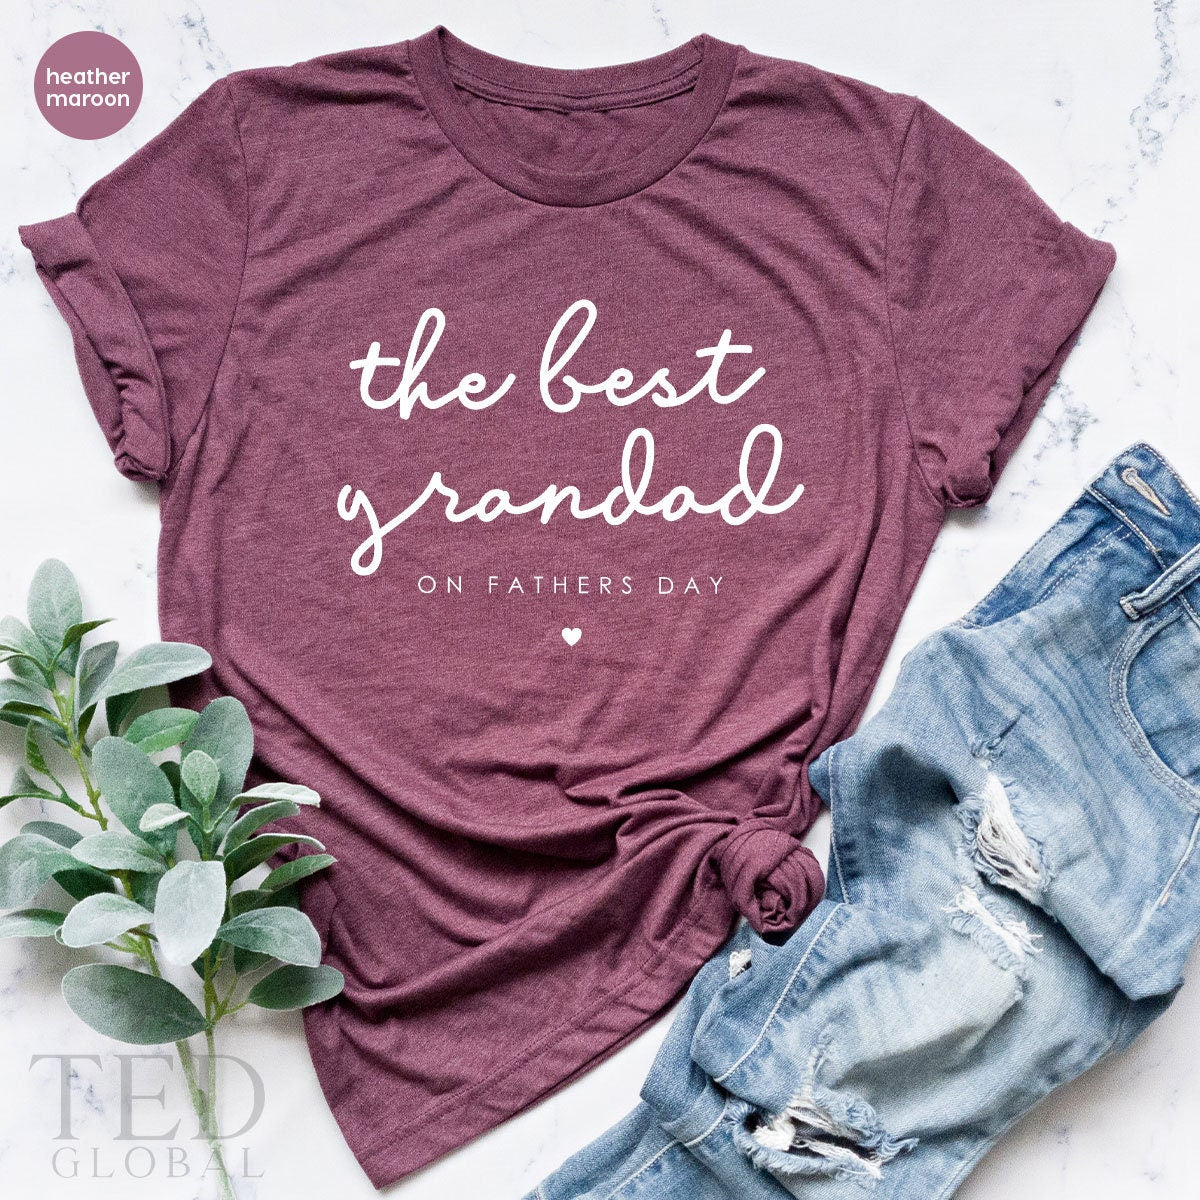 Grandpa Fathers Day Gifts, The Best Grandad Shirt, Grandpa Shirt, Papa Shirt, Fathers Day Tee, Gift For Grandpa, Baby Announcement For Dad - Fastdeliverytees.com